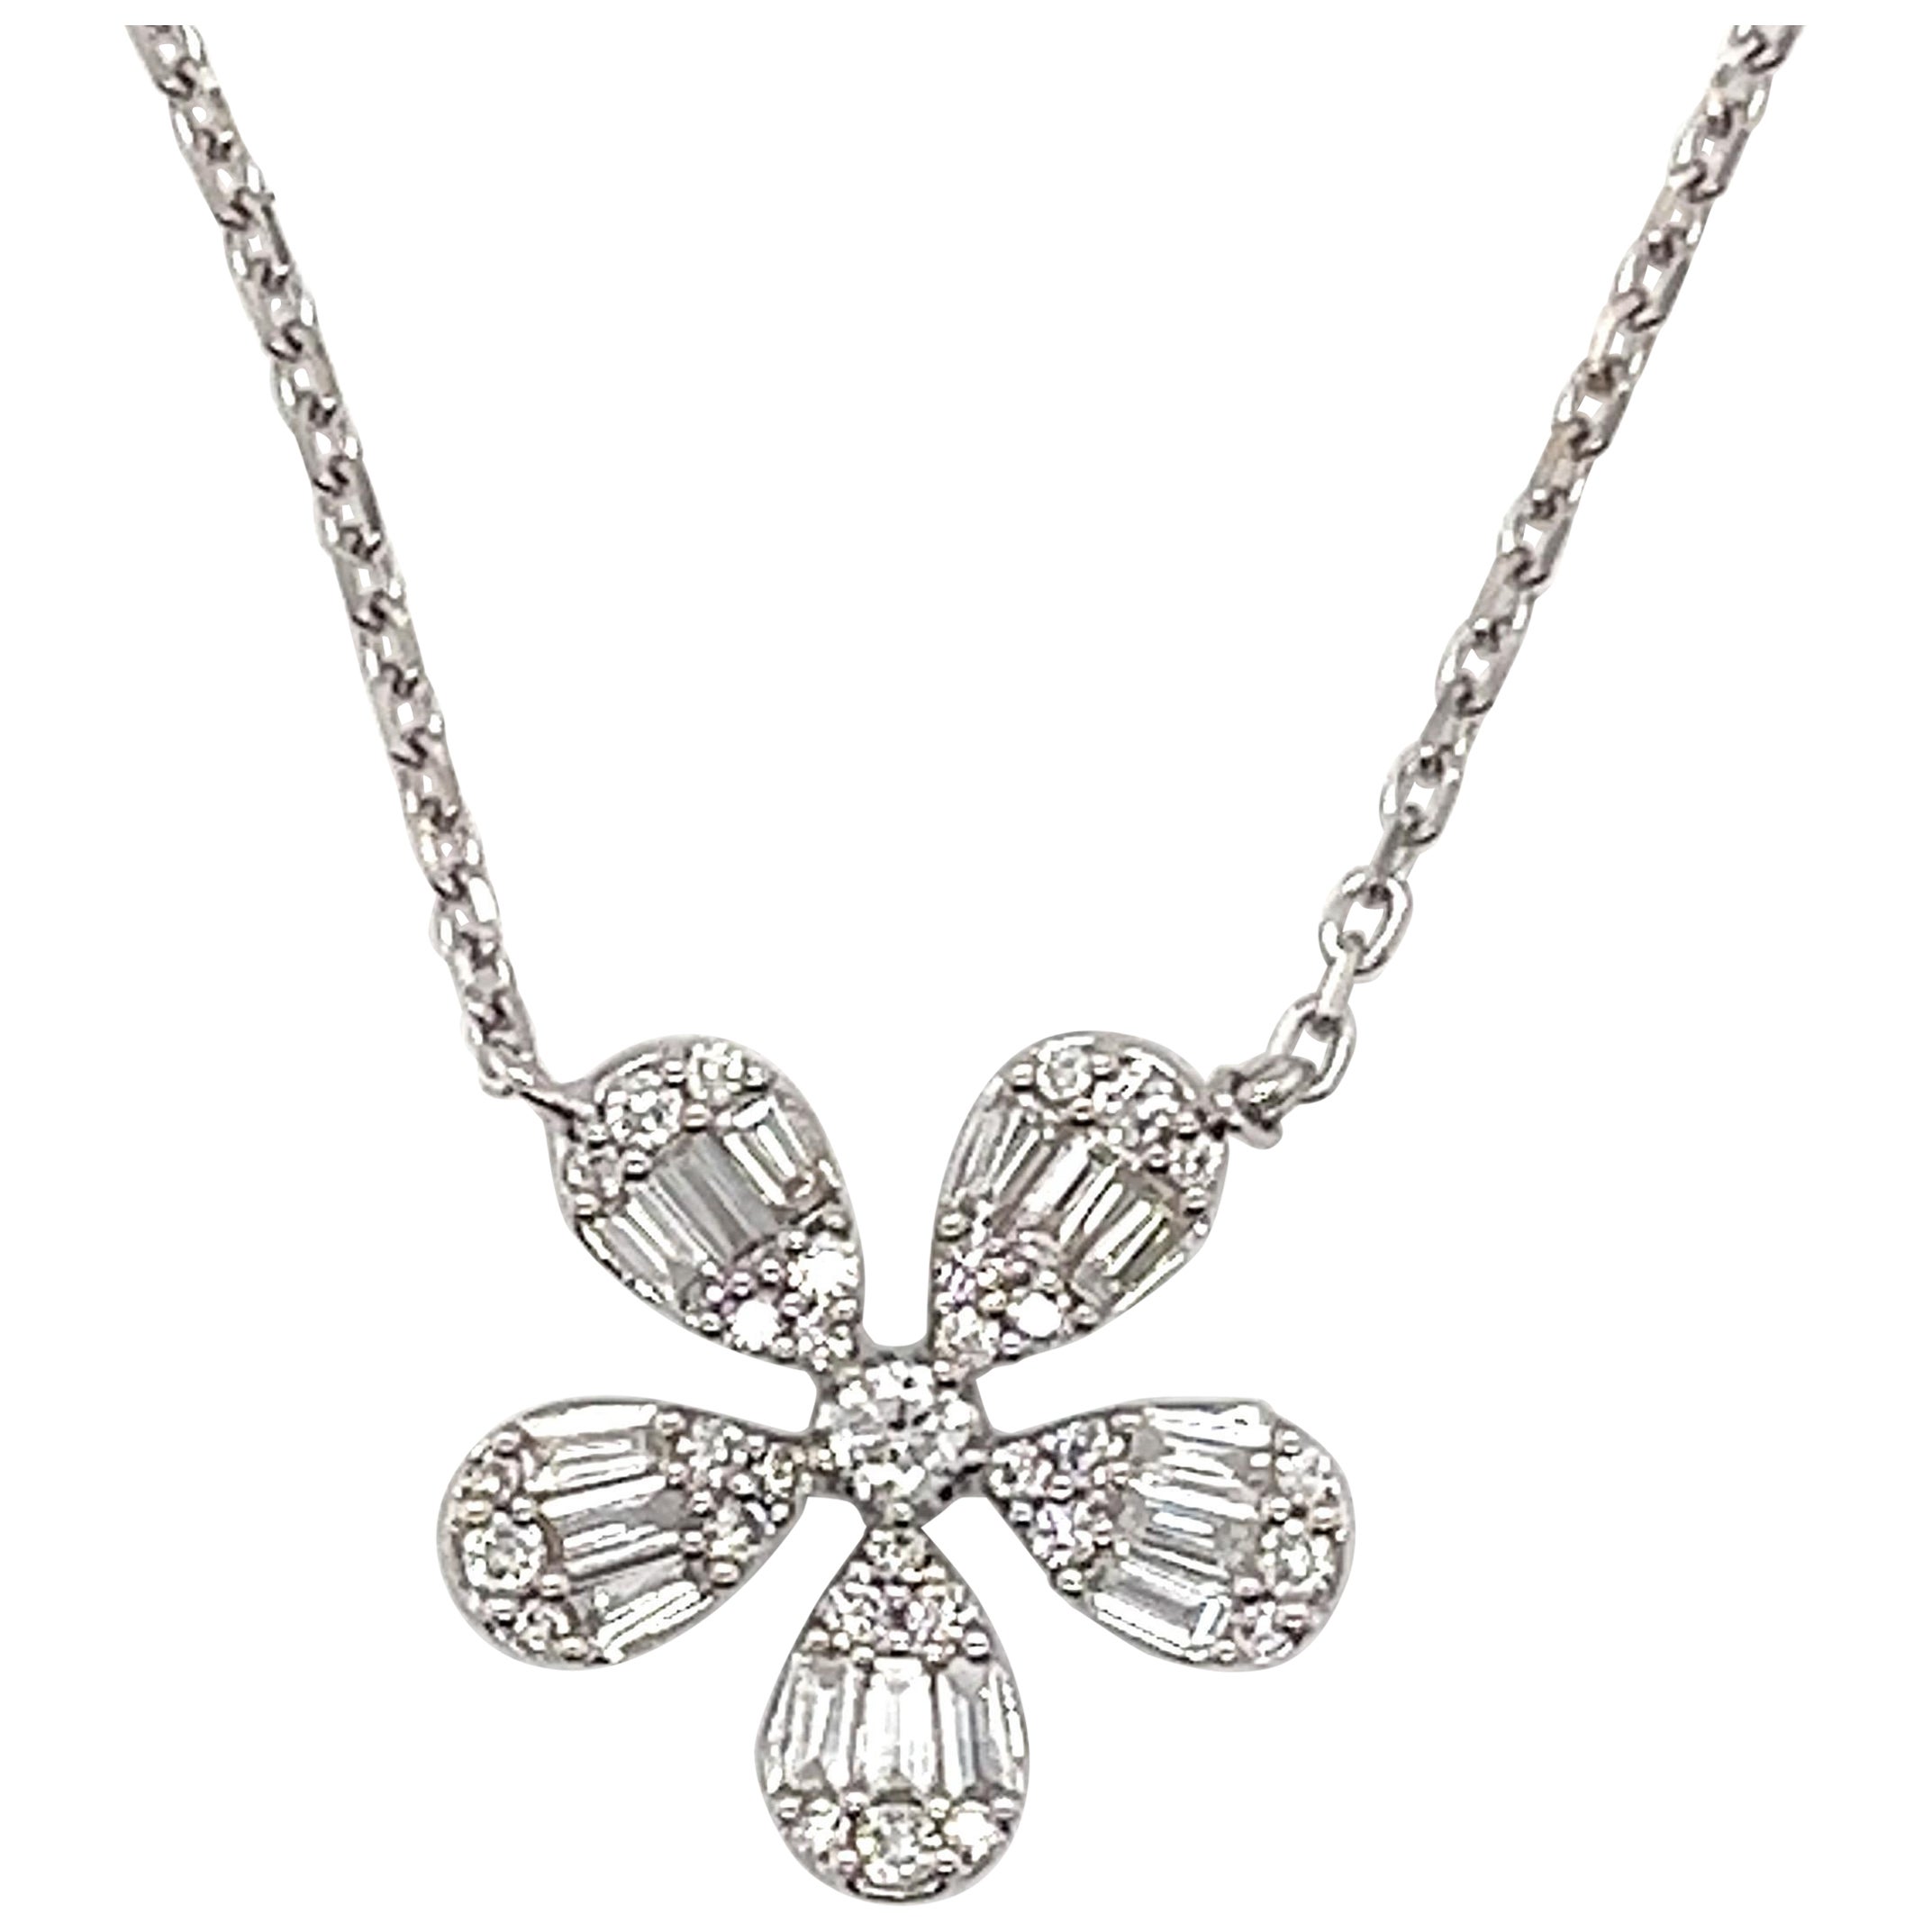 Diamond Clover Necklace in 18 Karat White Gold For Sale